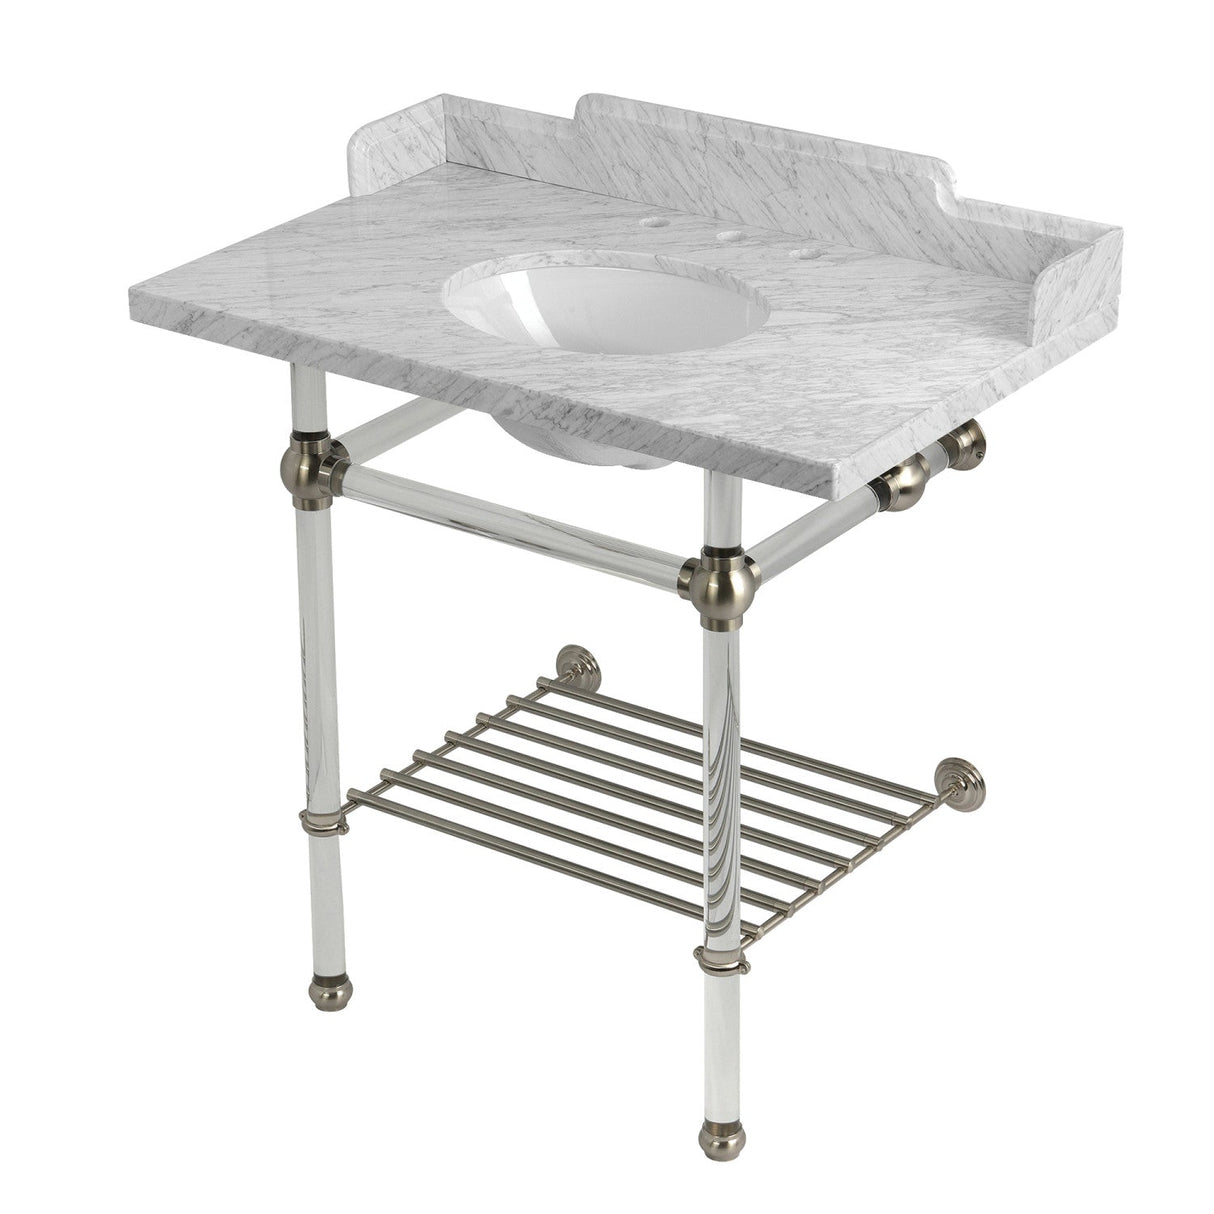 Pemberton LMS36MAB8 36-Inch Console Sink with Acrylic Legs (8-Inch, 3 Hole), Marble White/Brushed Nickel